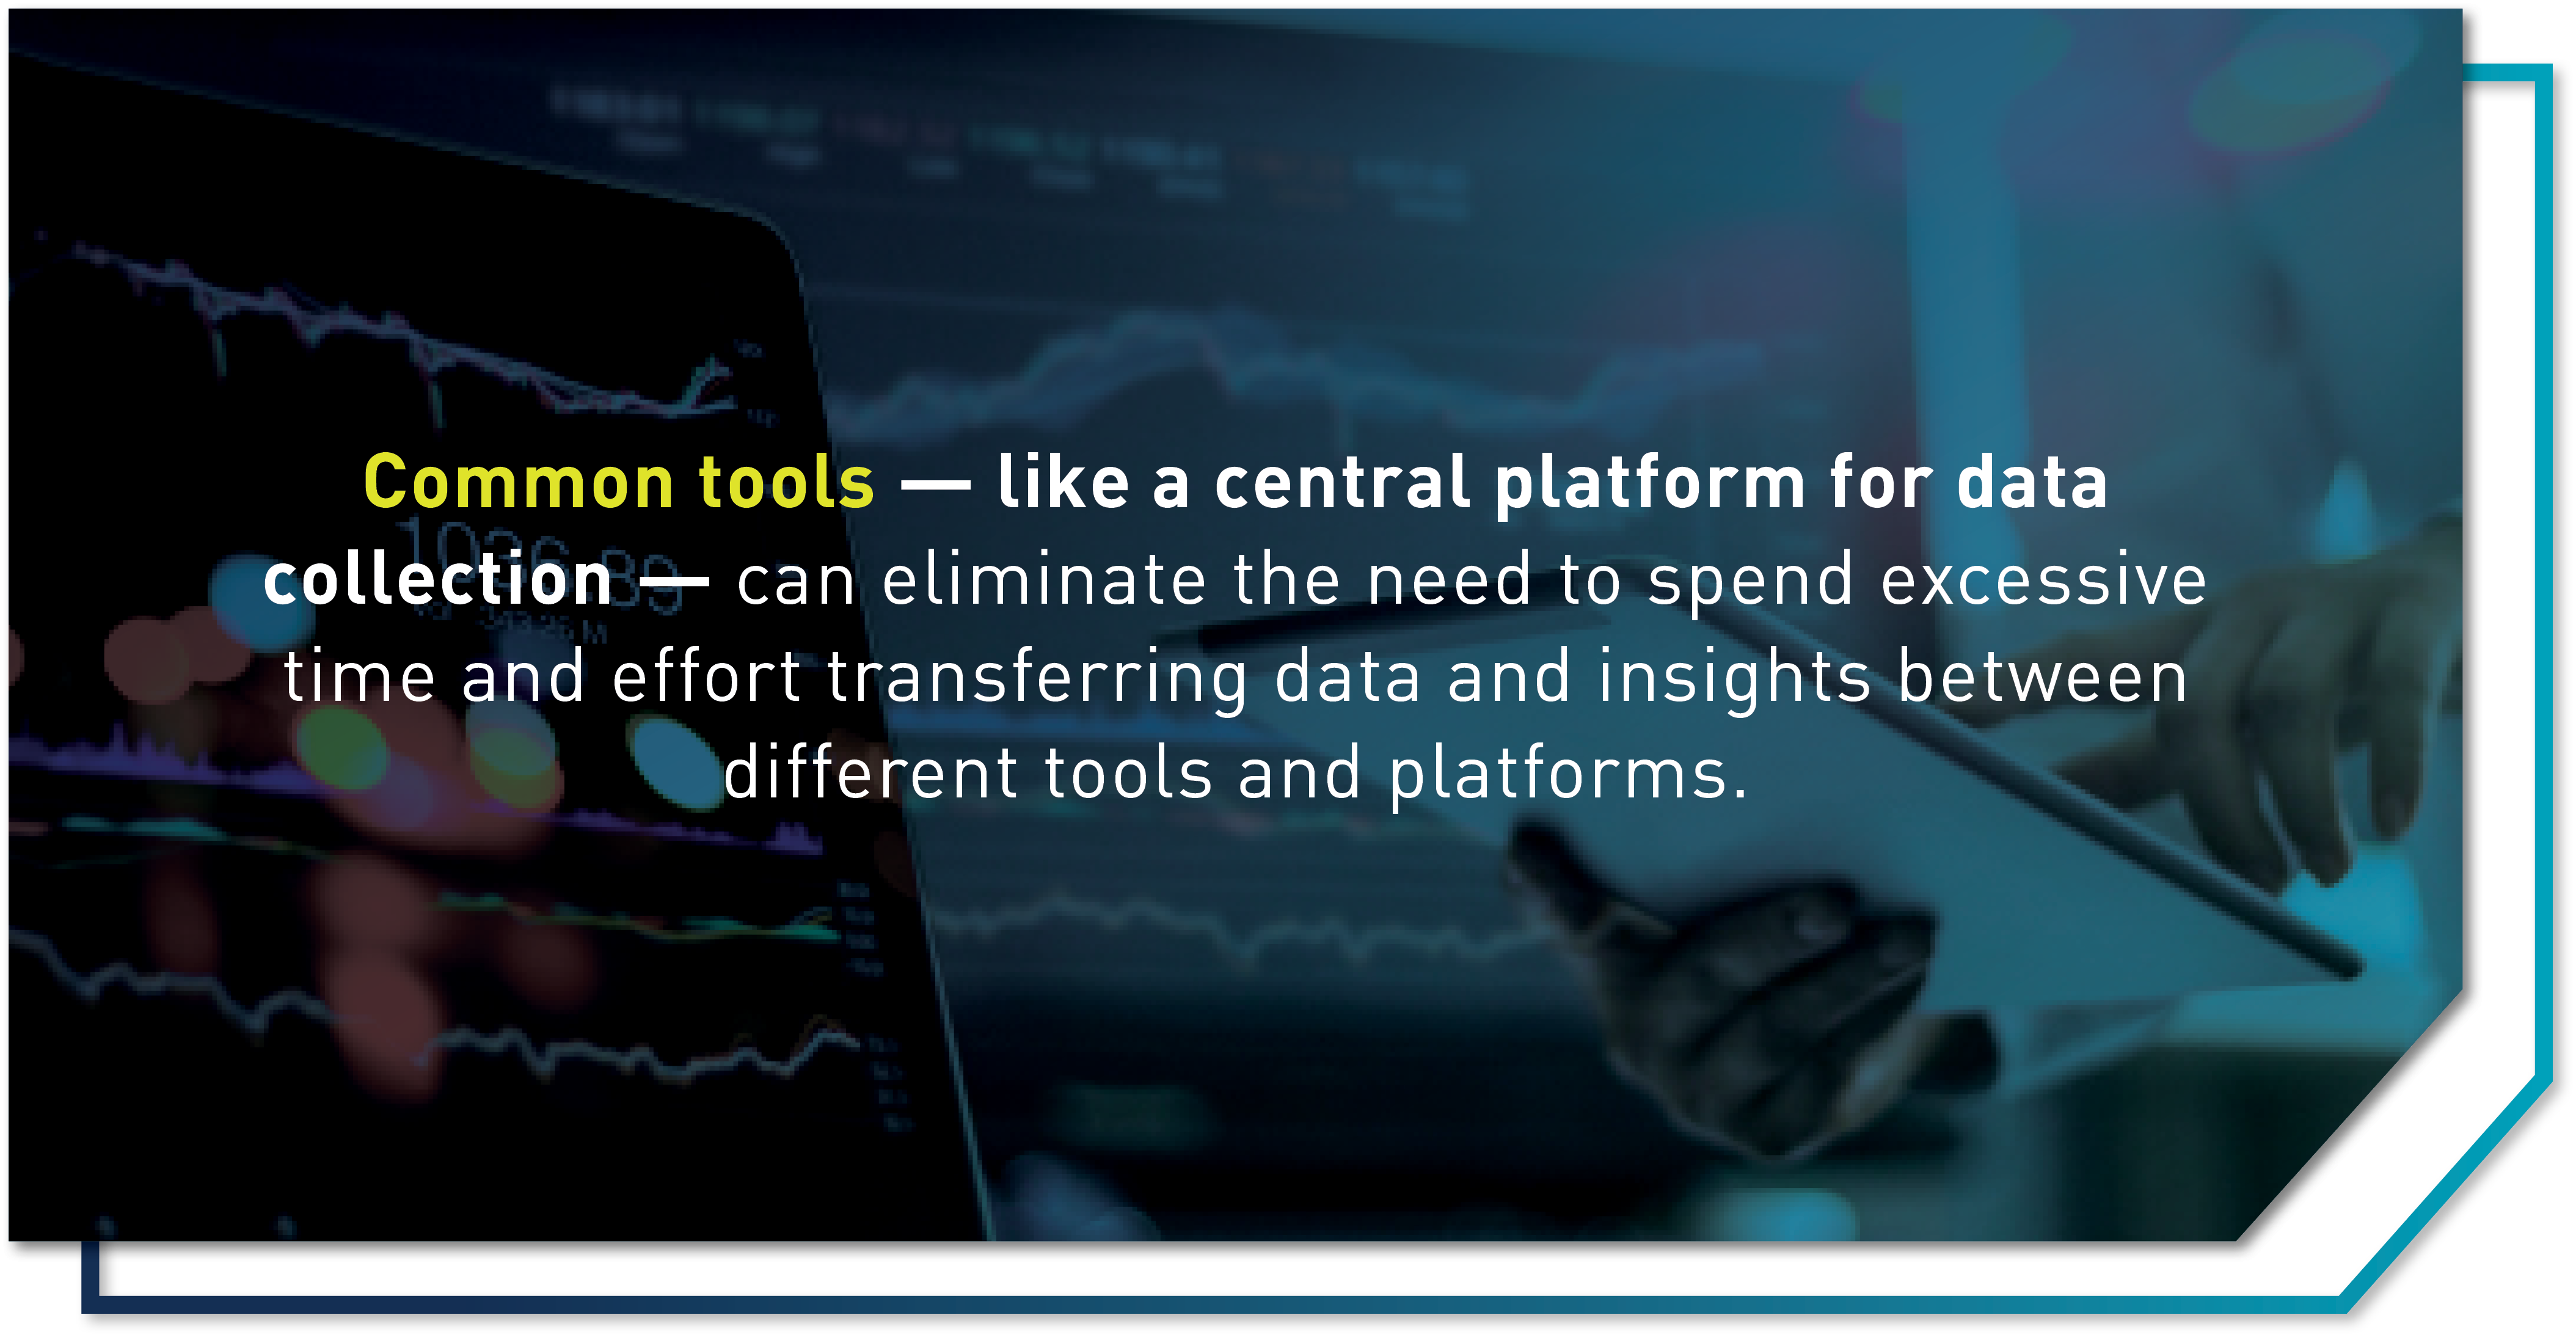 Graphic with text that says: "Common tools - like a central platform for data collection - can eliminate the need to spend excessive time and effort transferring data and insights between different tools and platforms."